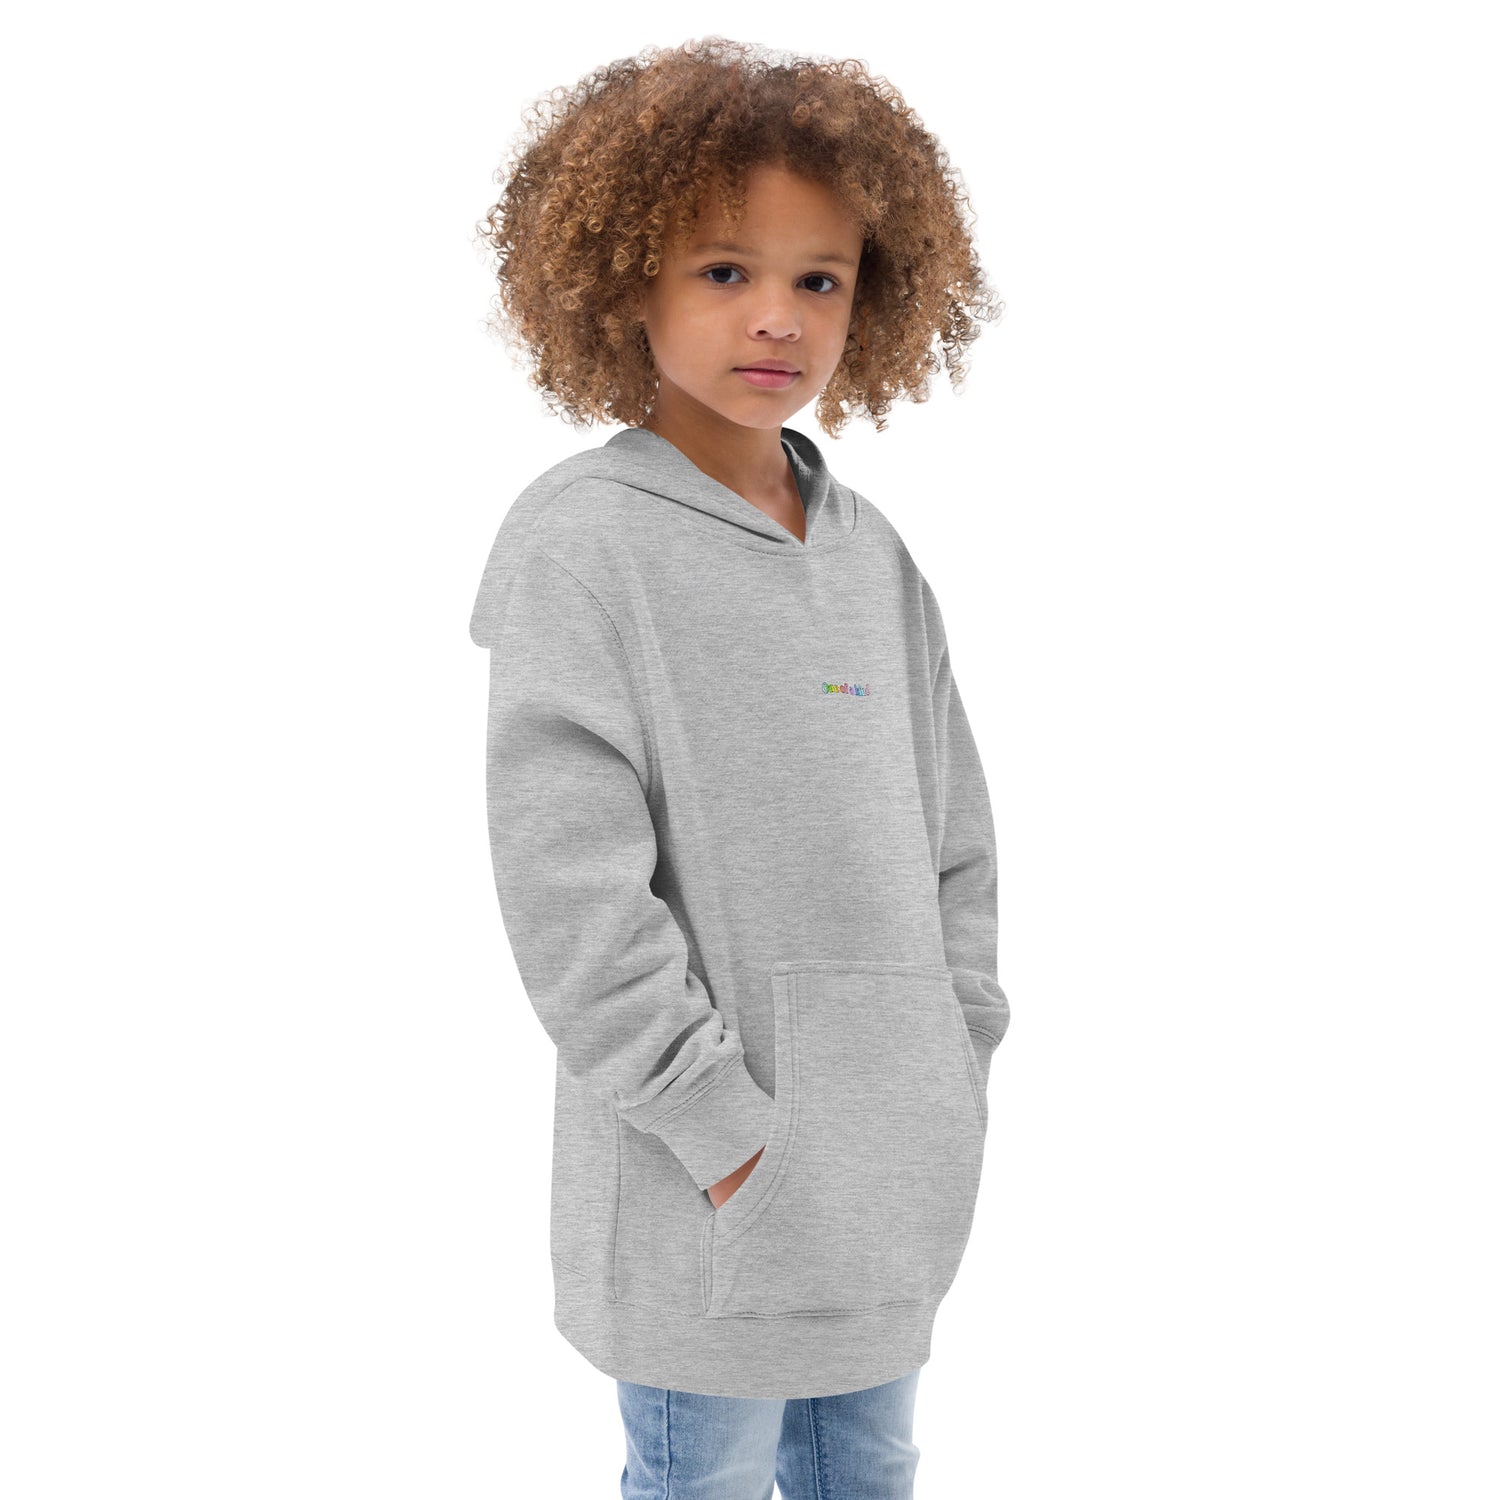 Right-front of grey kidswear hoodie with pockets, featuring " One of a kind" design